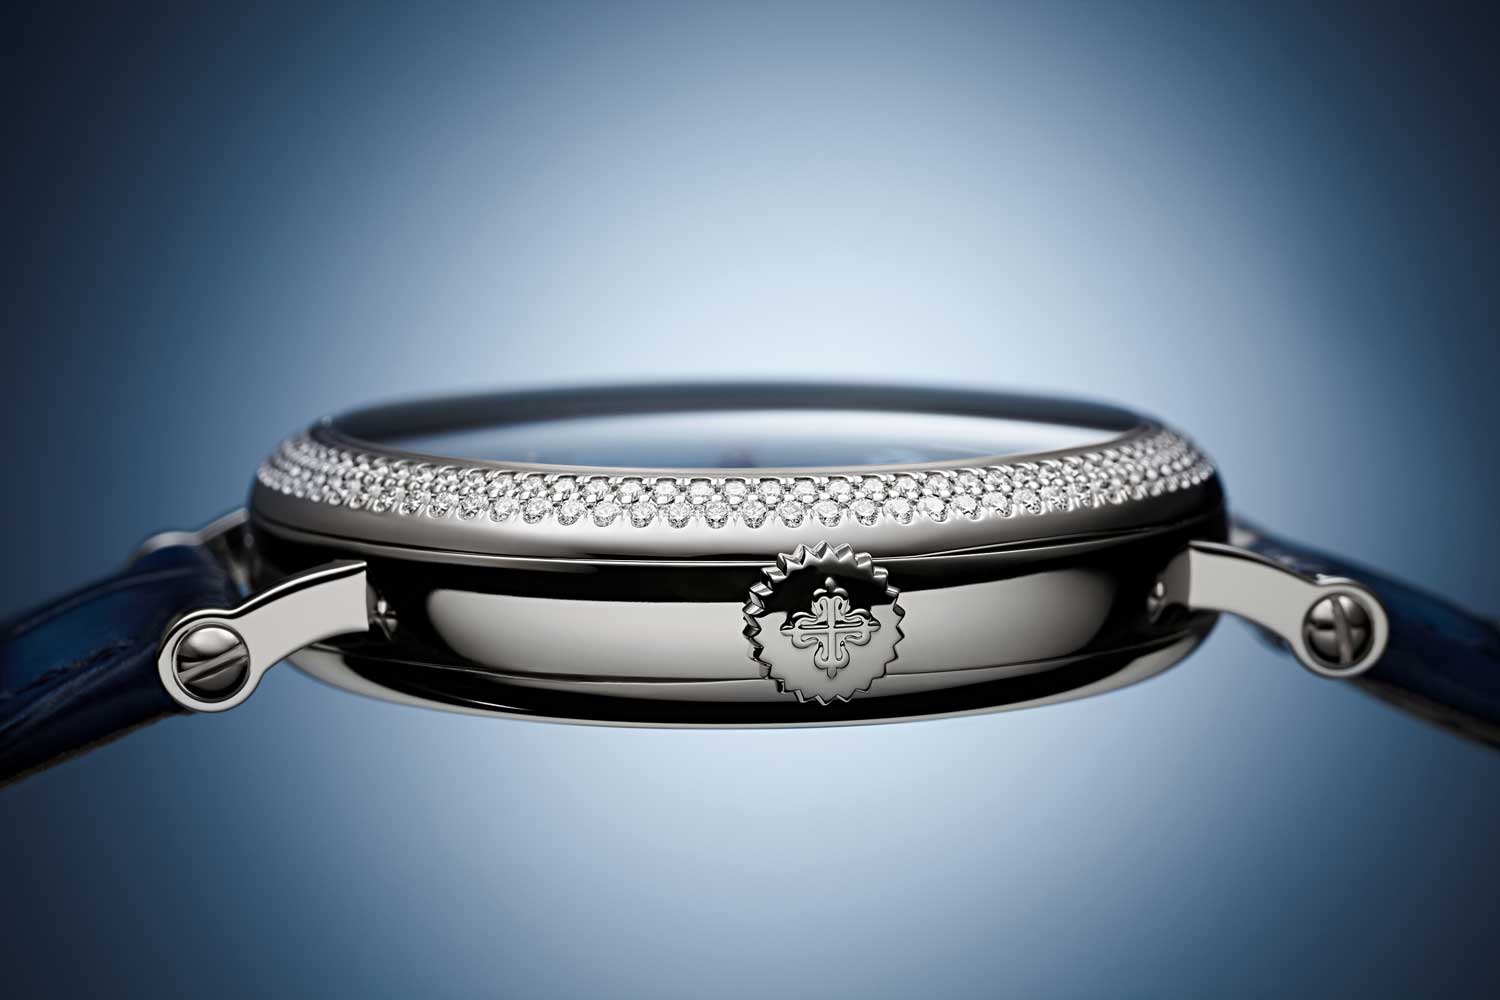 Patek Philippe’s exclusive “Flamme®” technique lends an incomparable brilliance to the bezel set with 168 Top Wesselton pure diamonds.